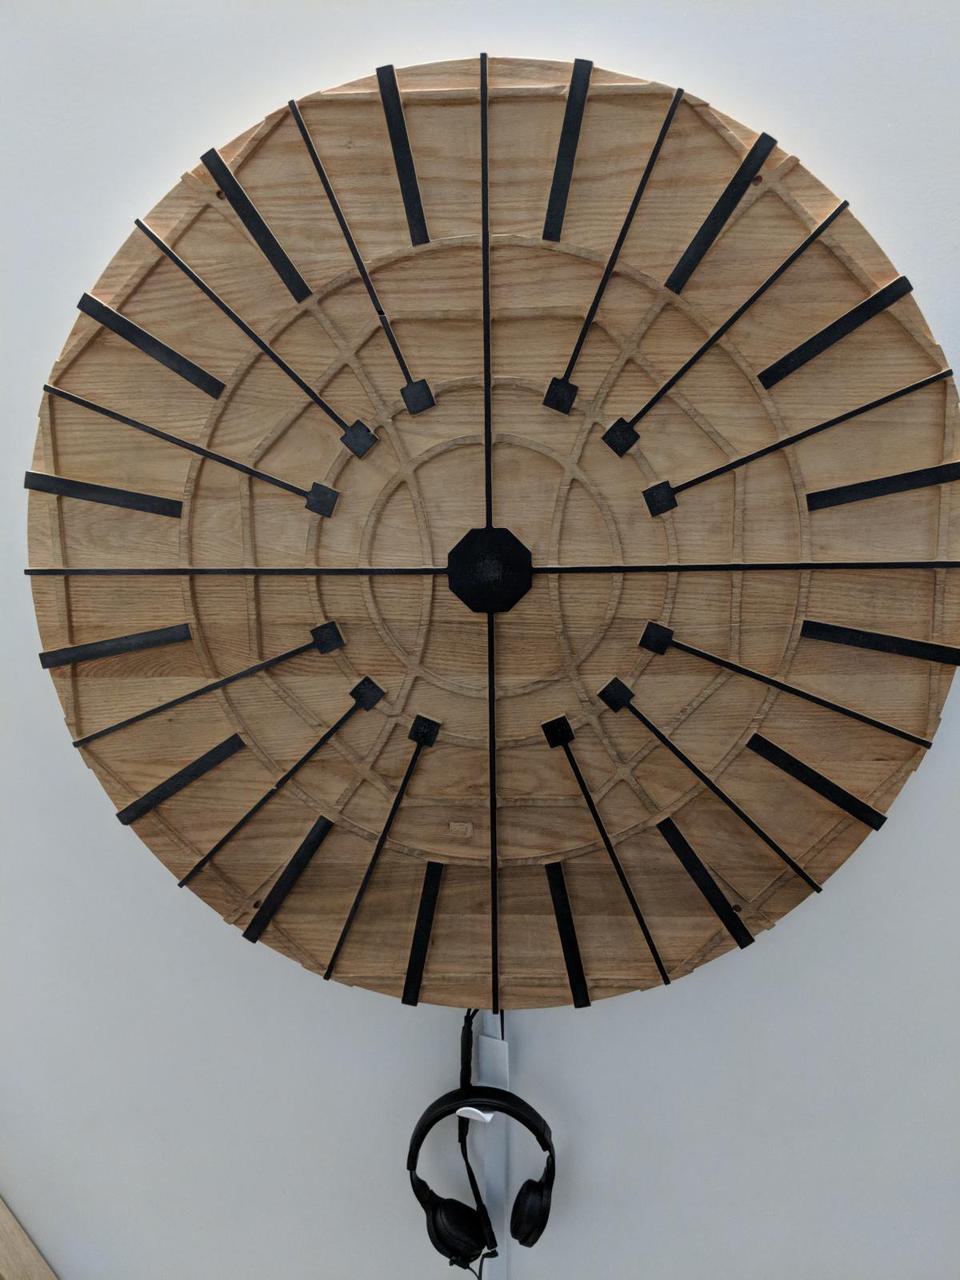 circular wood on wall with black lines created with conductive paint extending from edges to center